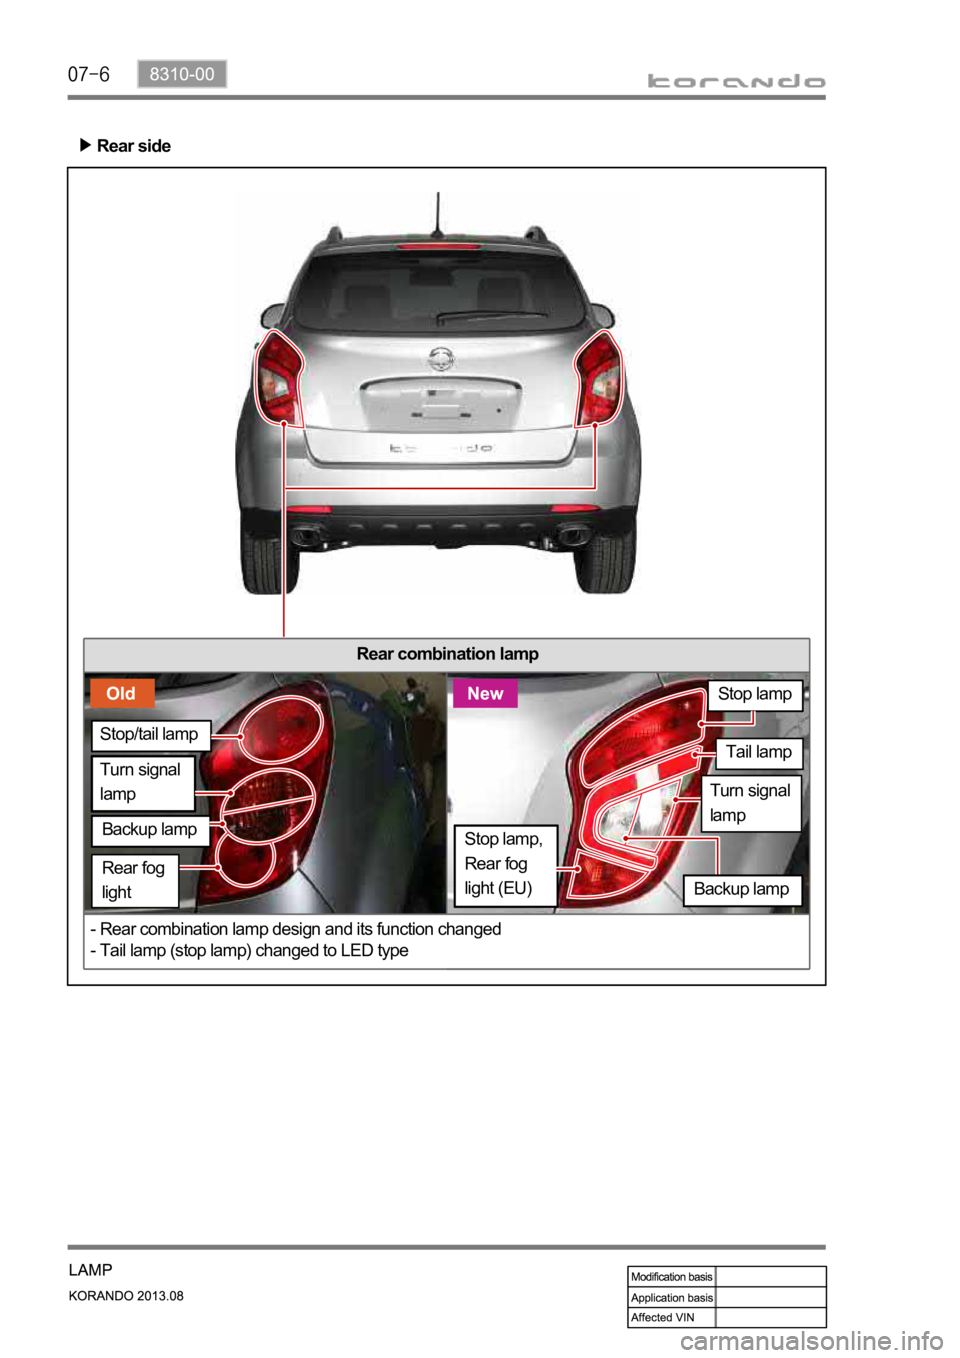 SSANGYONG KORANDO 2013  Service Manual Rear side
Rear combination lamp
- Rear combination lamp design and its function changed
- Tail lamp (stop lamp) changed to LED type
Backup lamp
Turn signal 
lamp
Stop/tail lamp
Rear fog 
light
Tail la